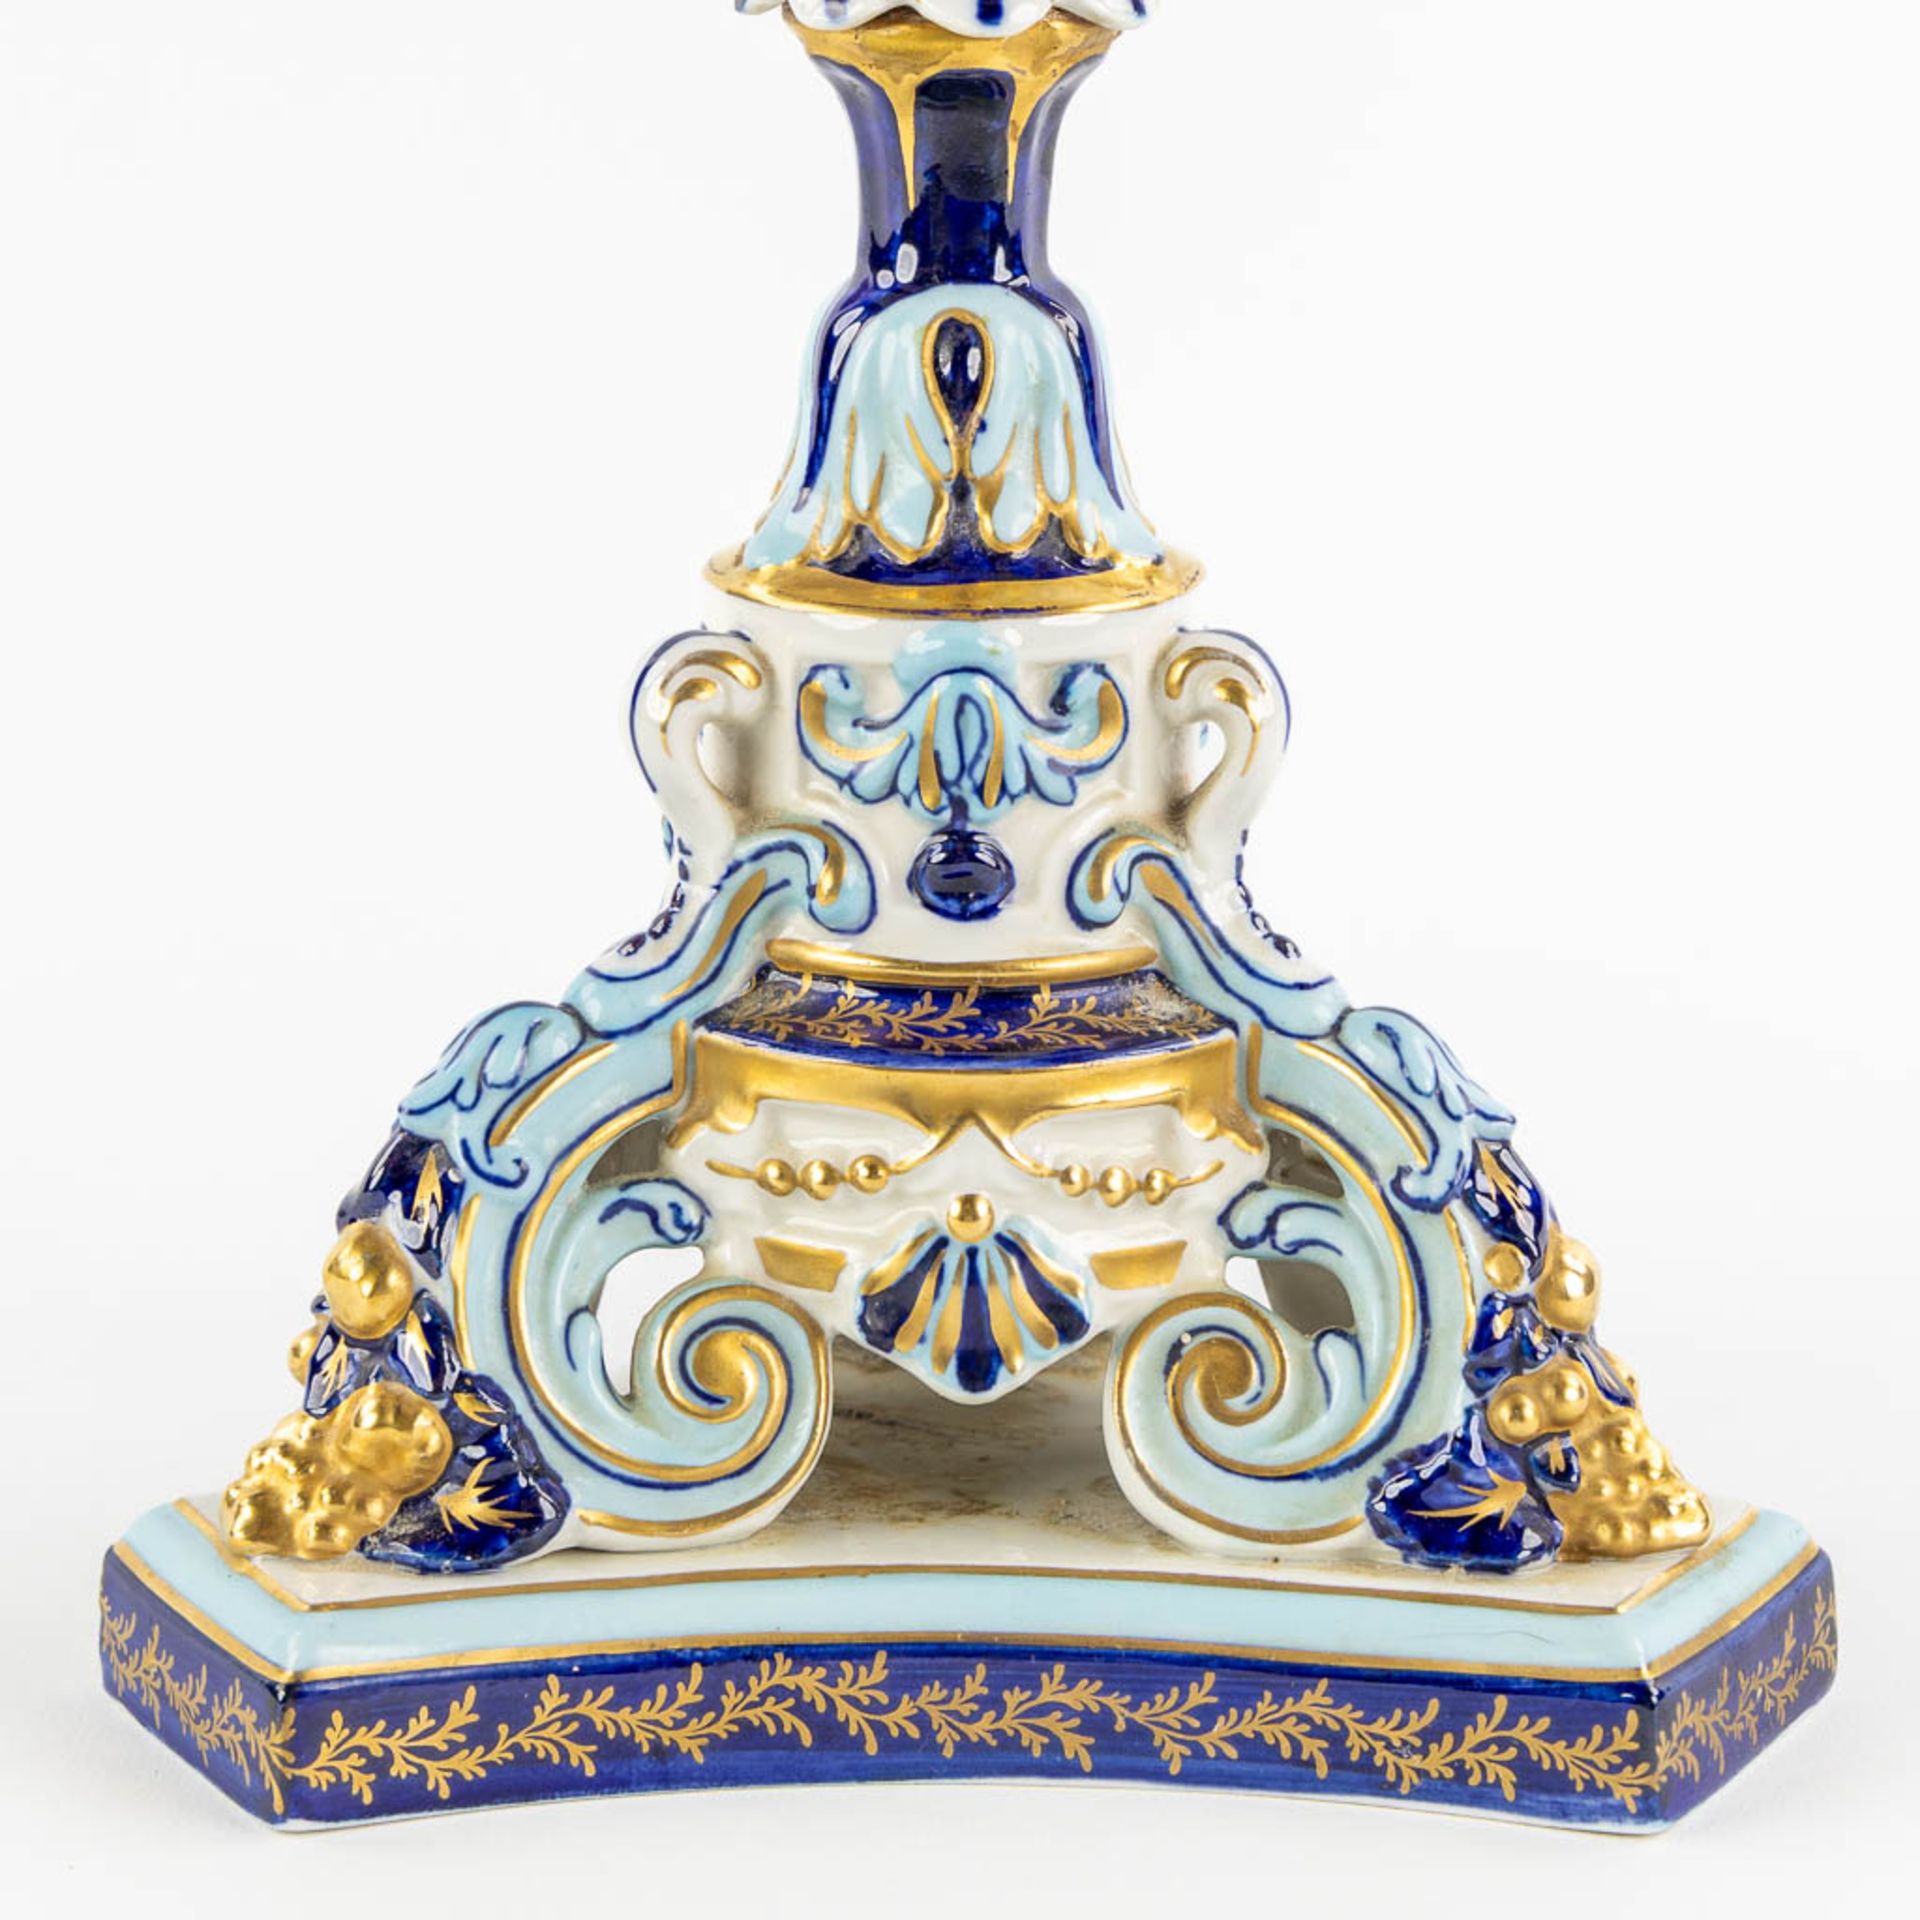 A candelabra, gilt brass and polychrome porcelain with flowers. Sèvres marks. (H:51 x D:24 cm) - Image 9 of 10